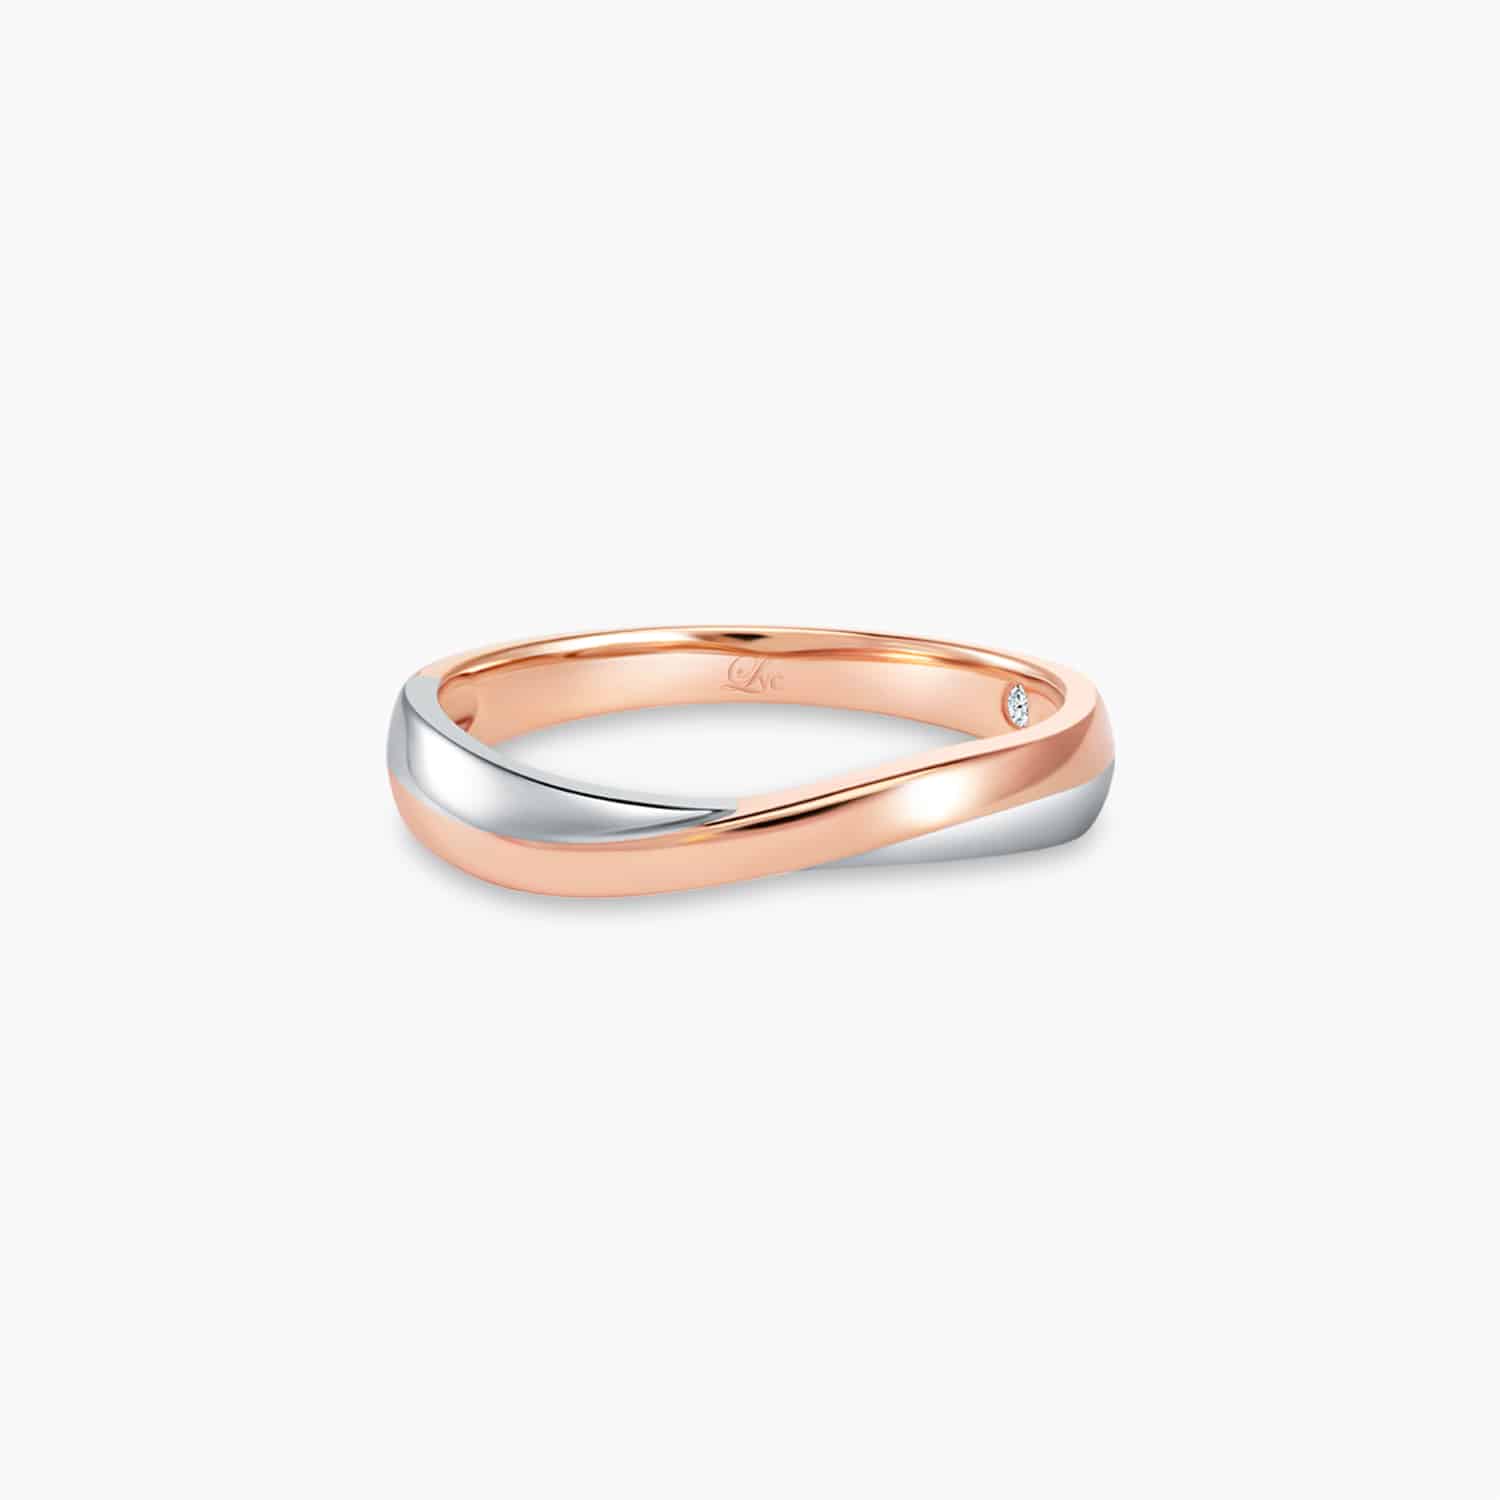 LVC PERFECTION BLISS WEDDING BAND IN WHITE AND ROSE GOLD a wedding band for men in white and rose gold with 1 diamond 钻石 戒指 cincin diamond